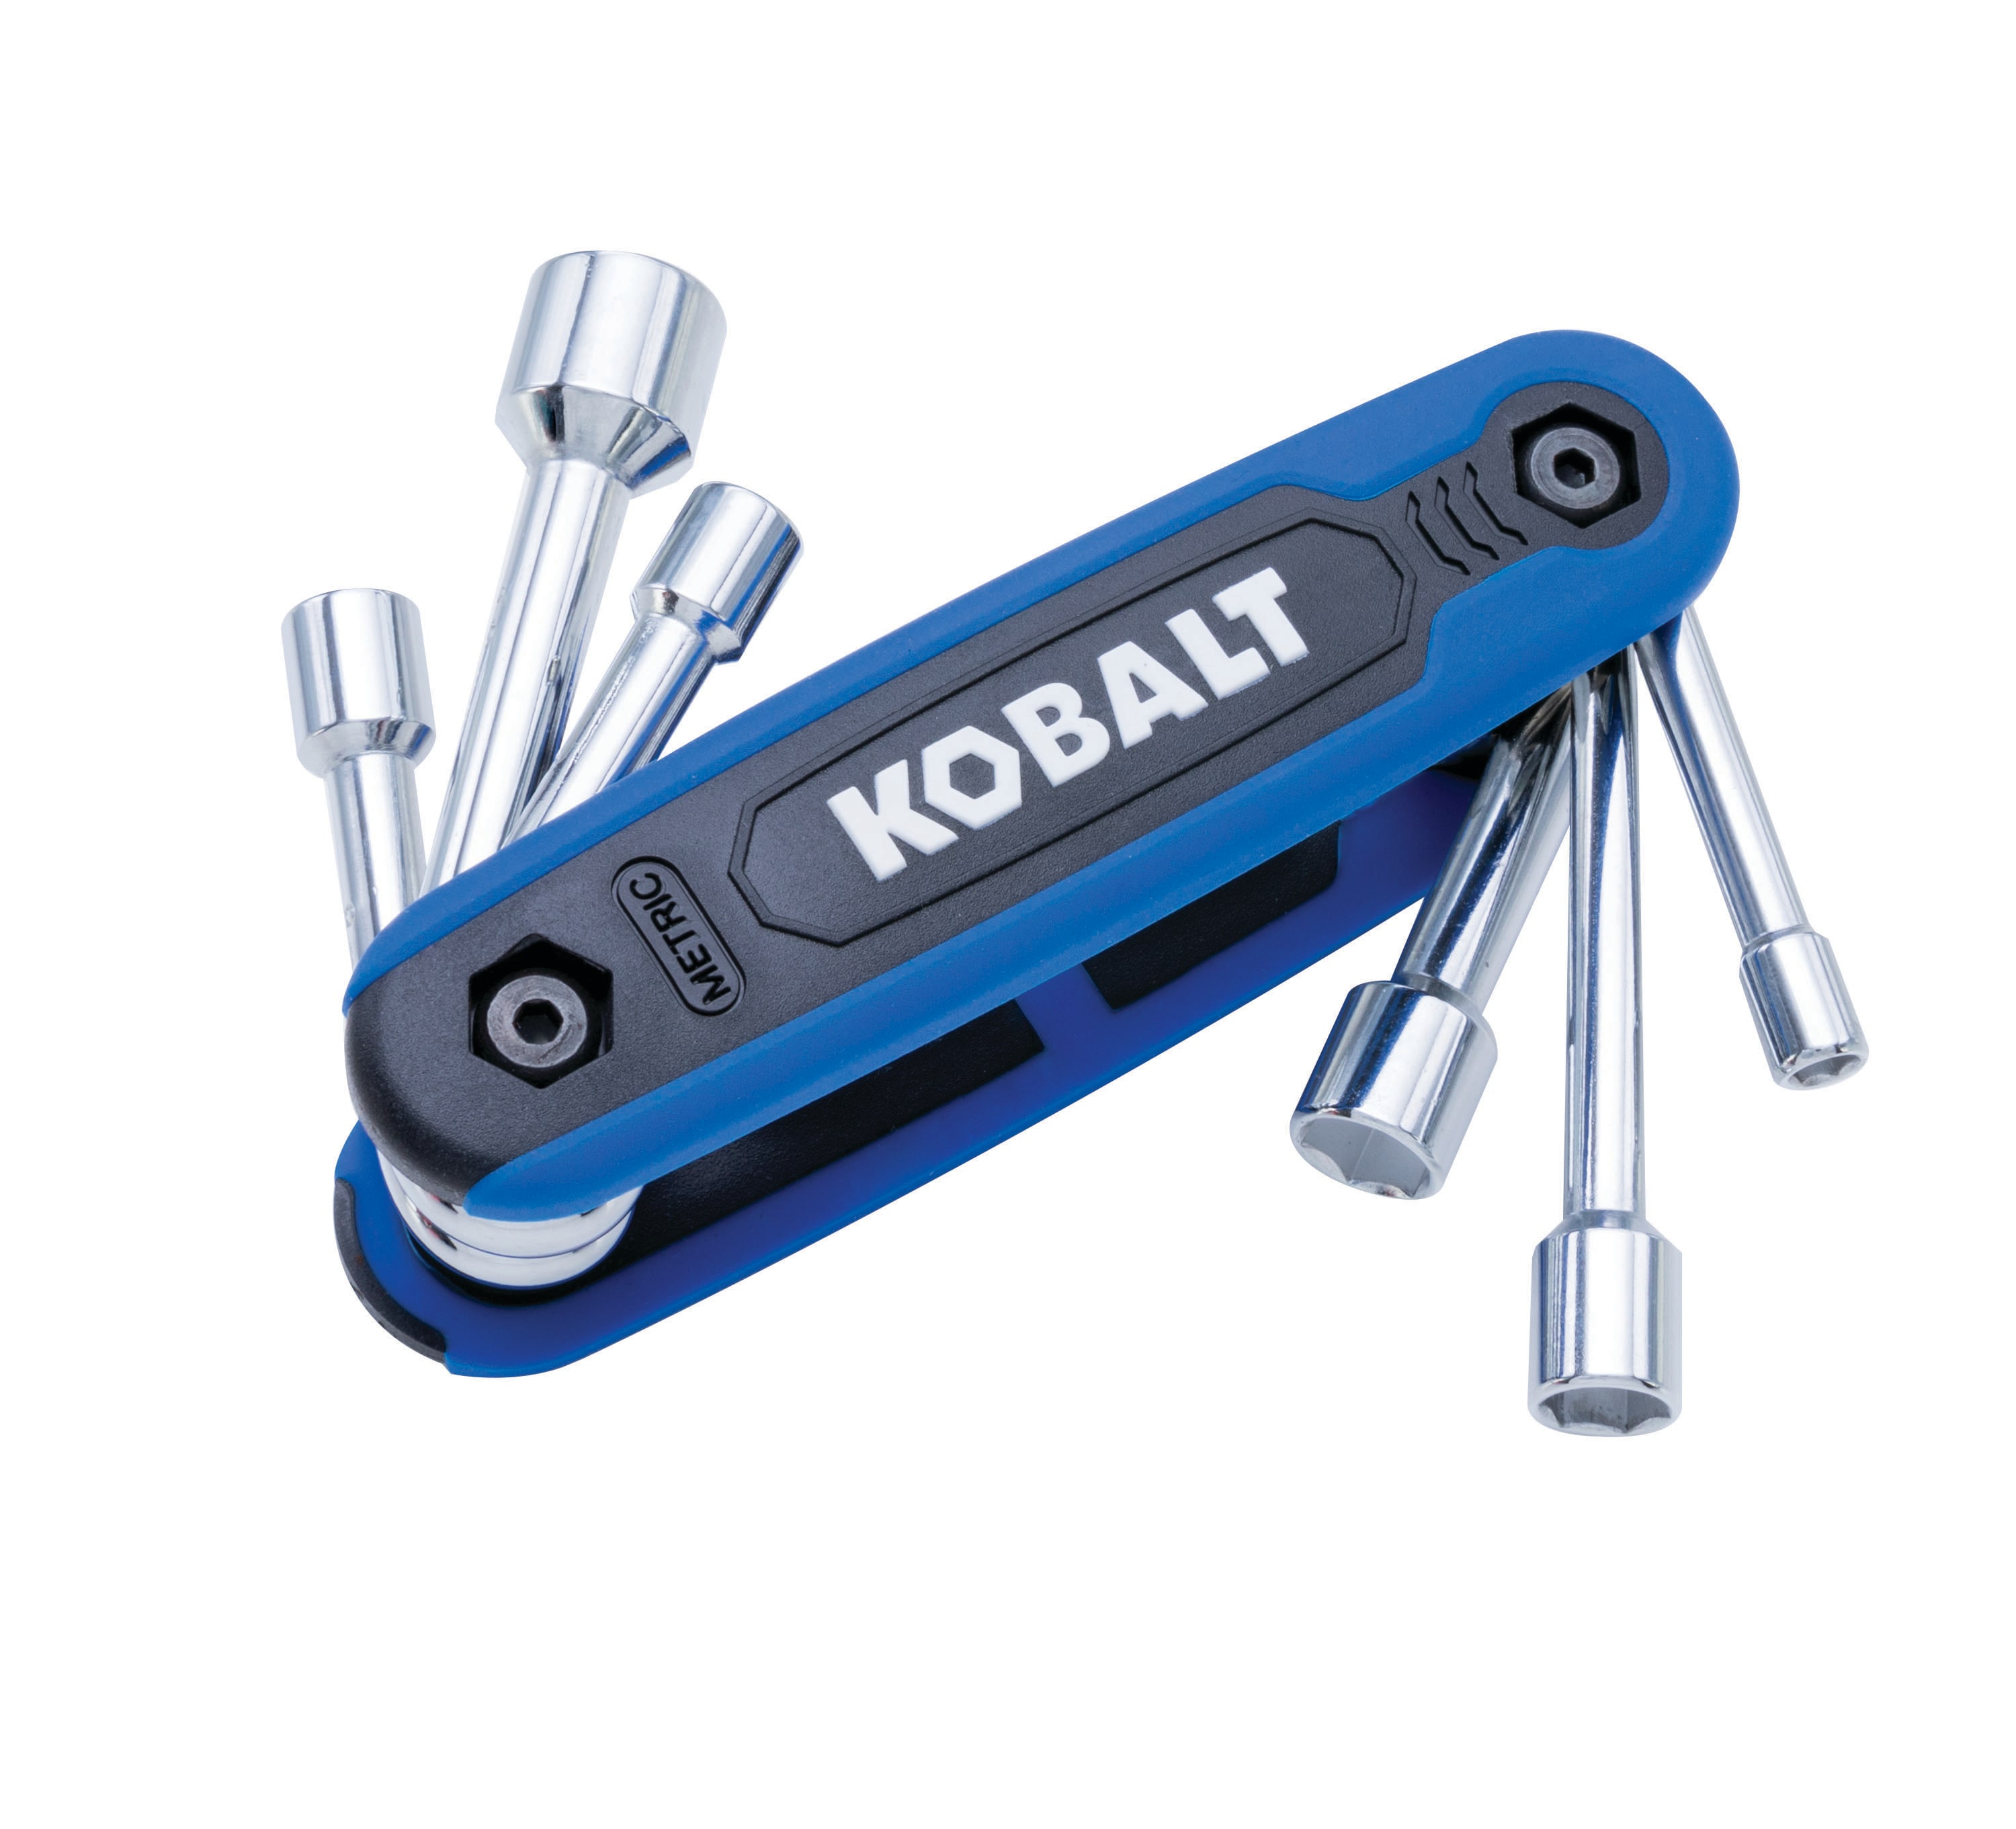 Kobalt 6-Piece Metric Hex Nut Driver Set in the Nut Driver Sets ...